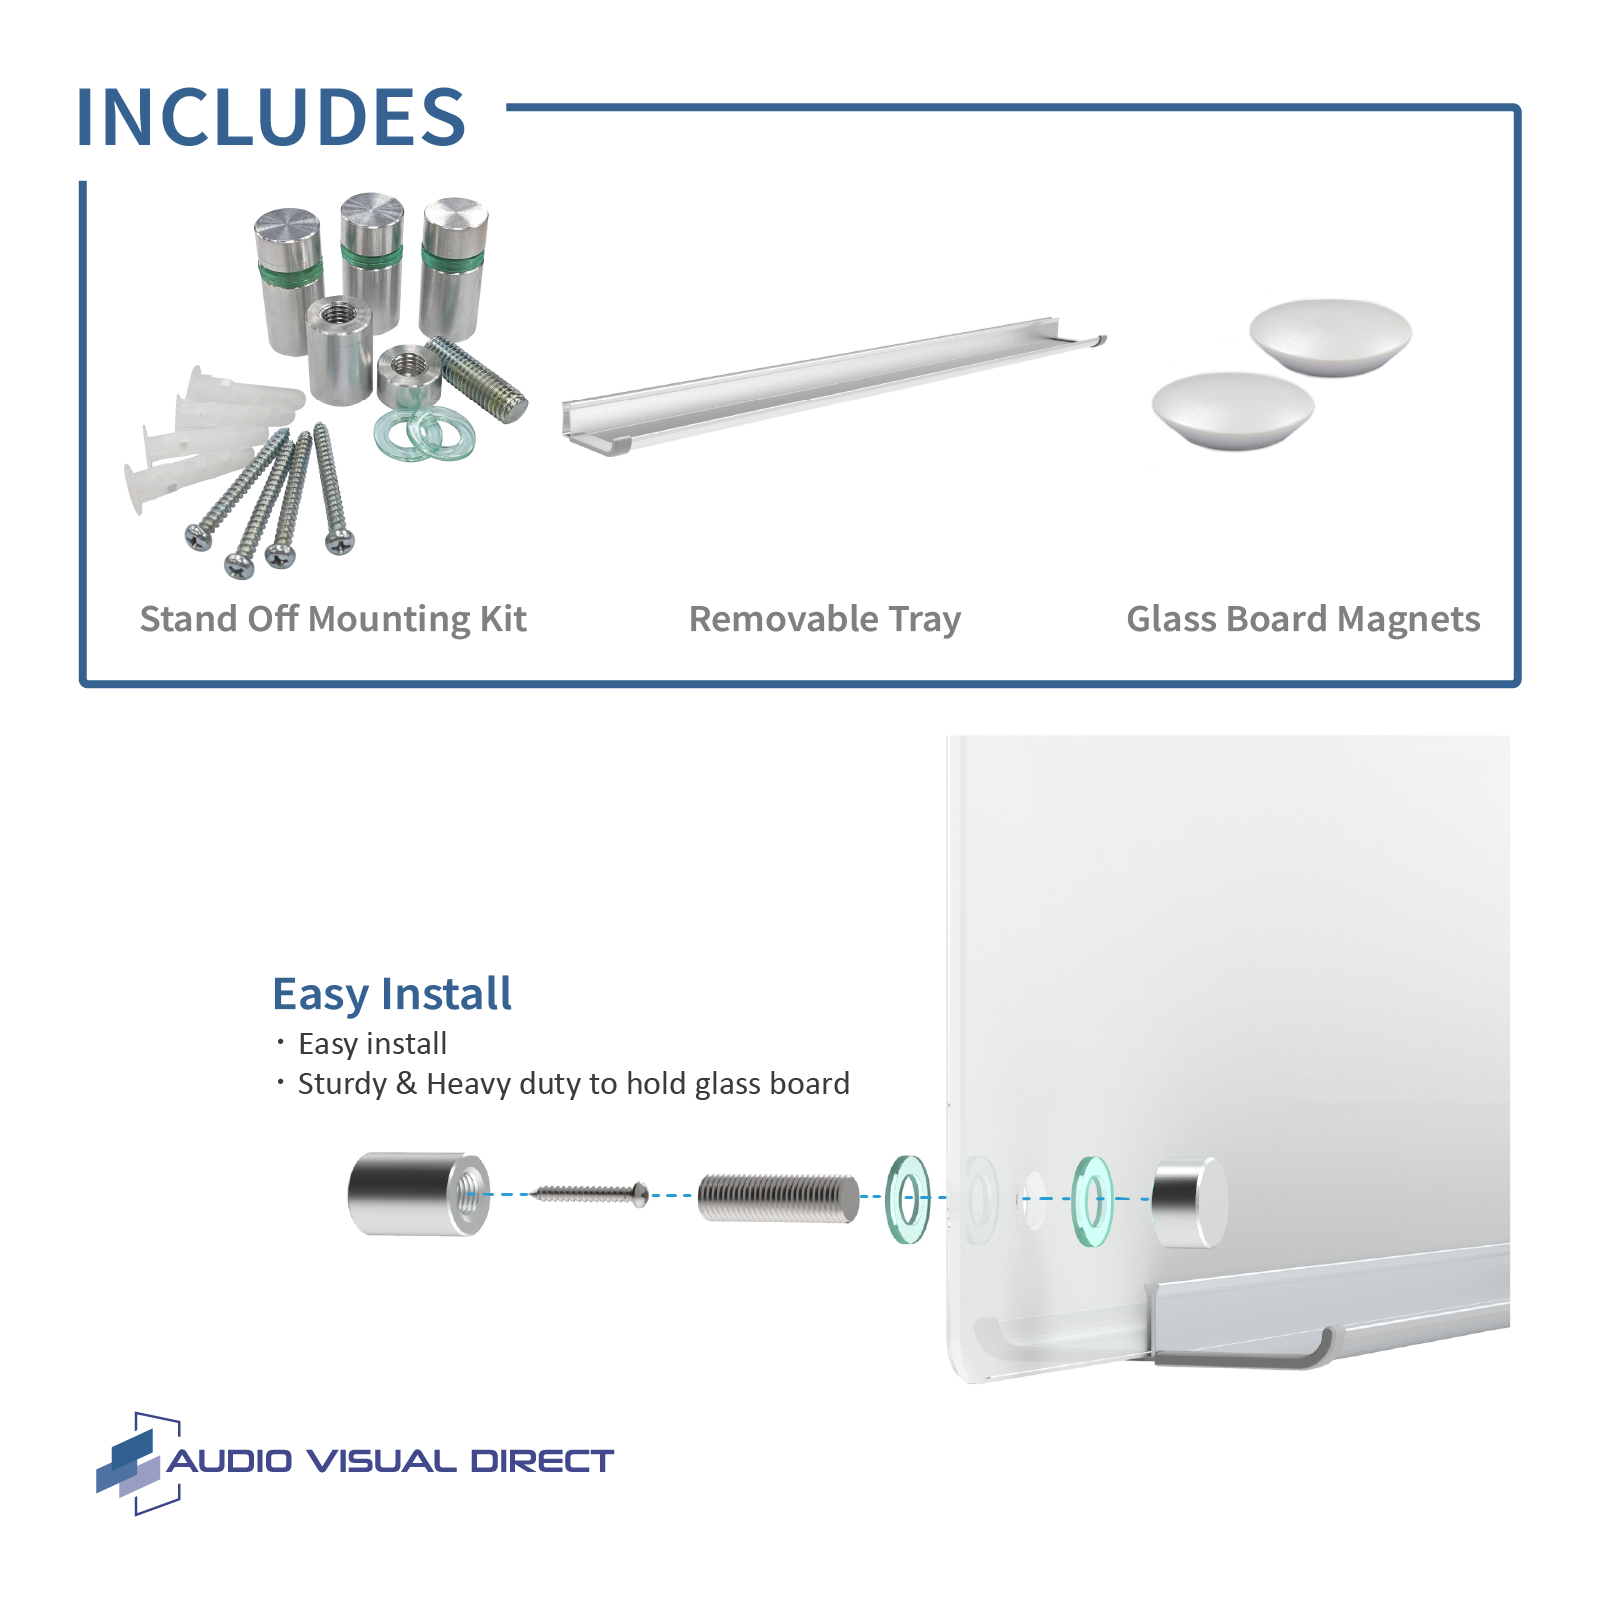 Audio-Visual Direct White Glass Board For Home & Office. Includes a stand off mounting kit, removable marker tray, and glass board magnets. It is easy to install & heavy duty. 